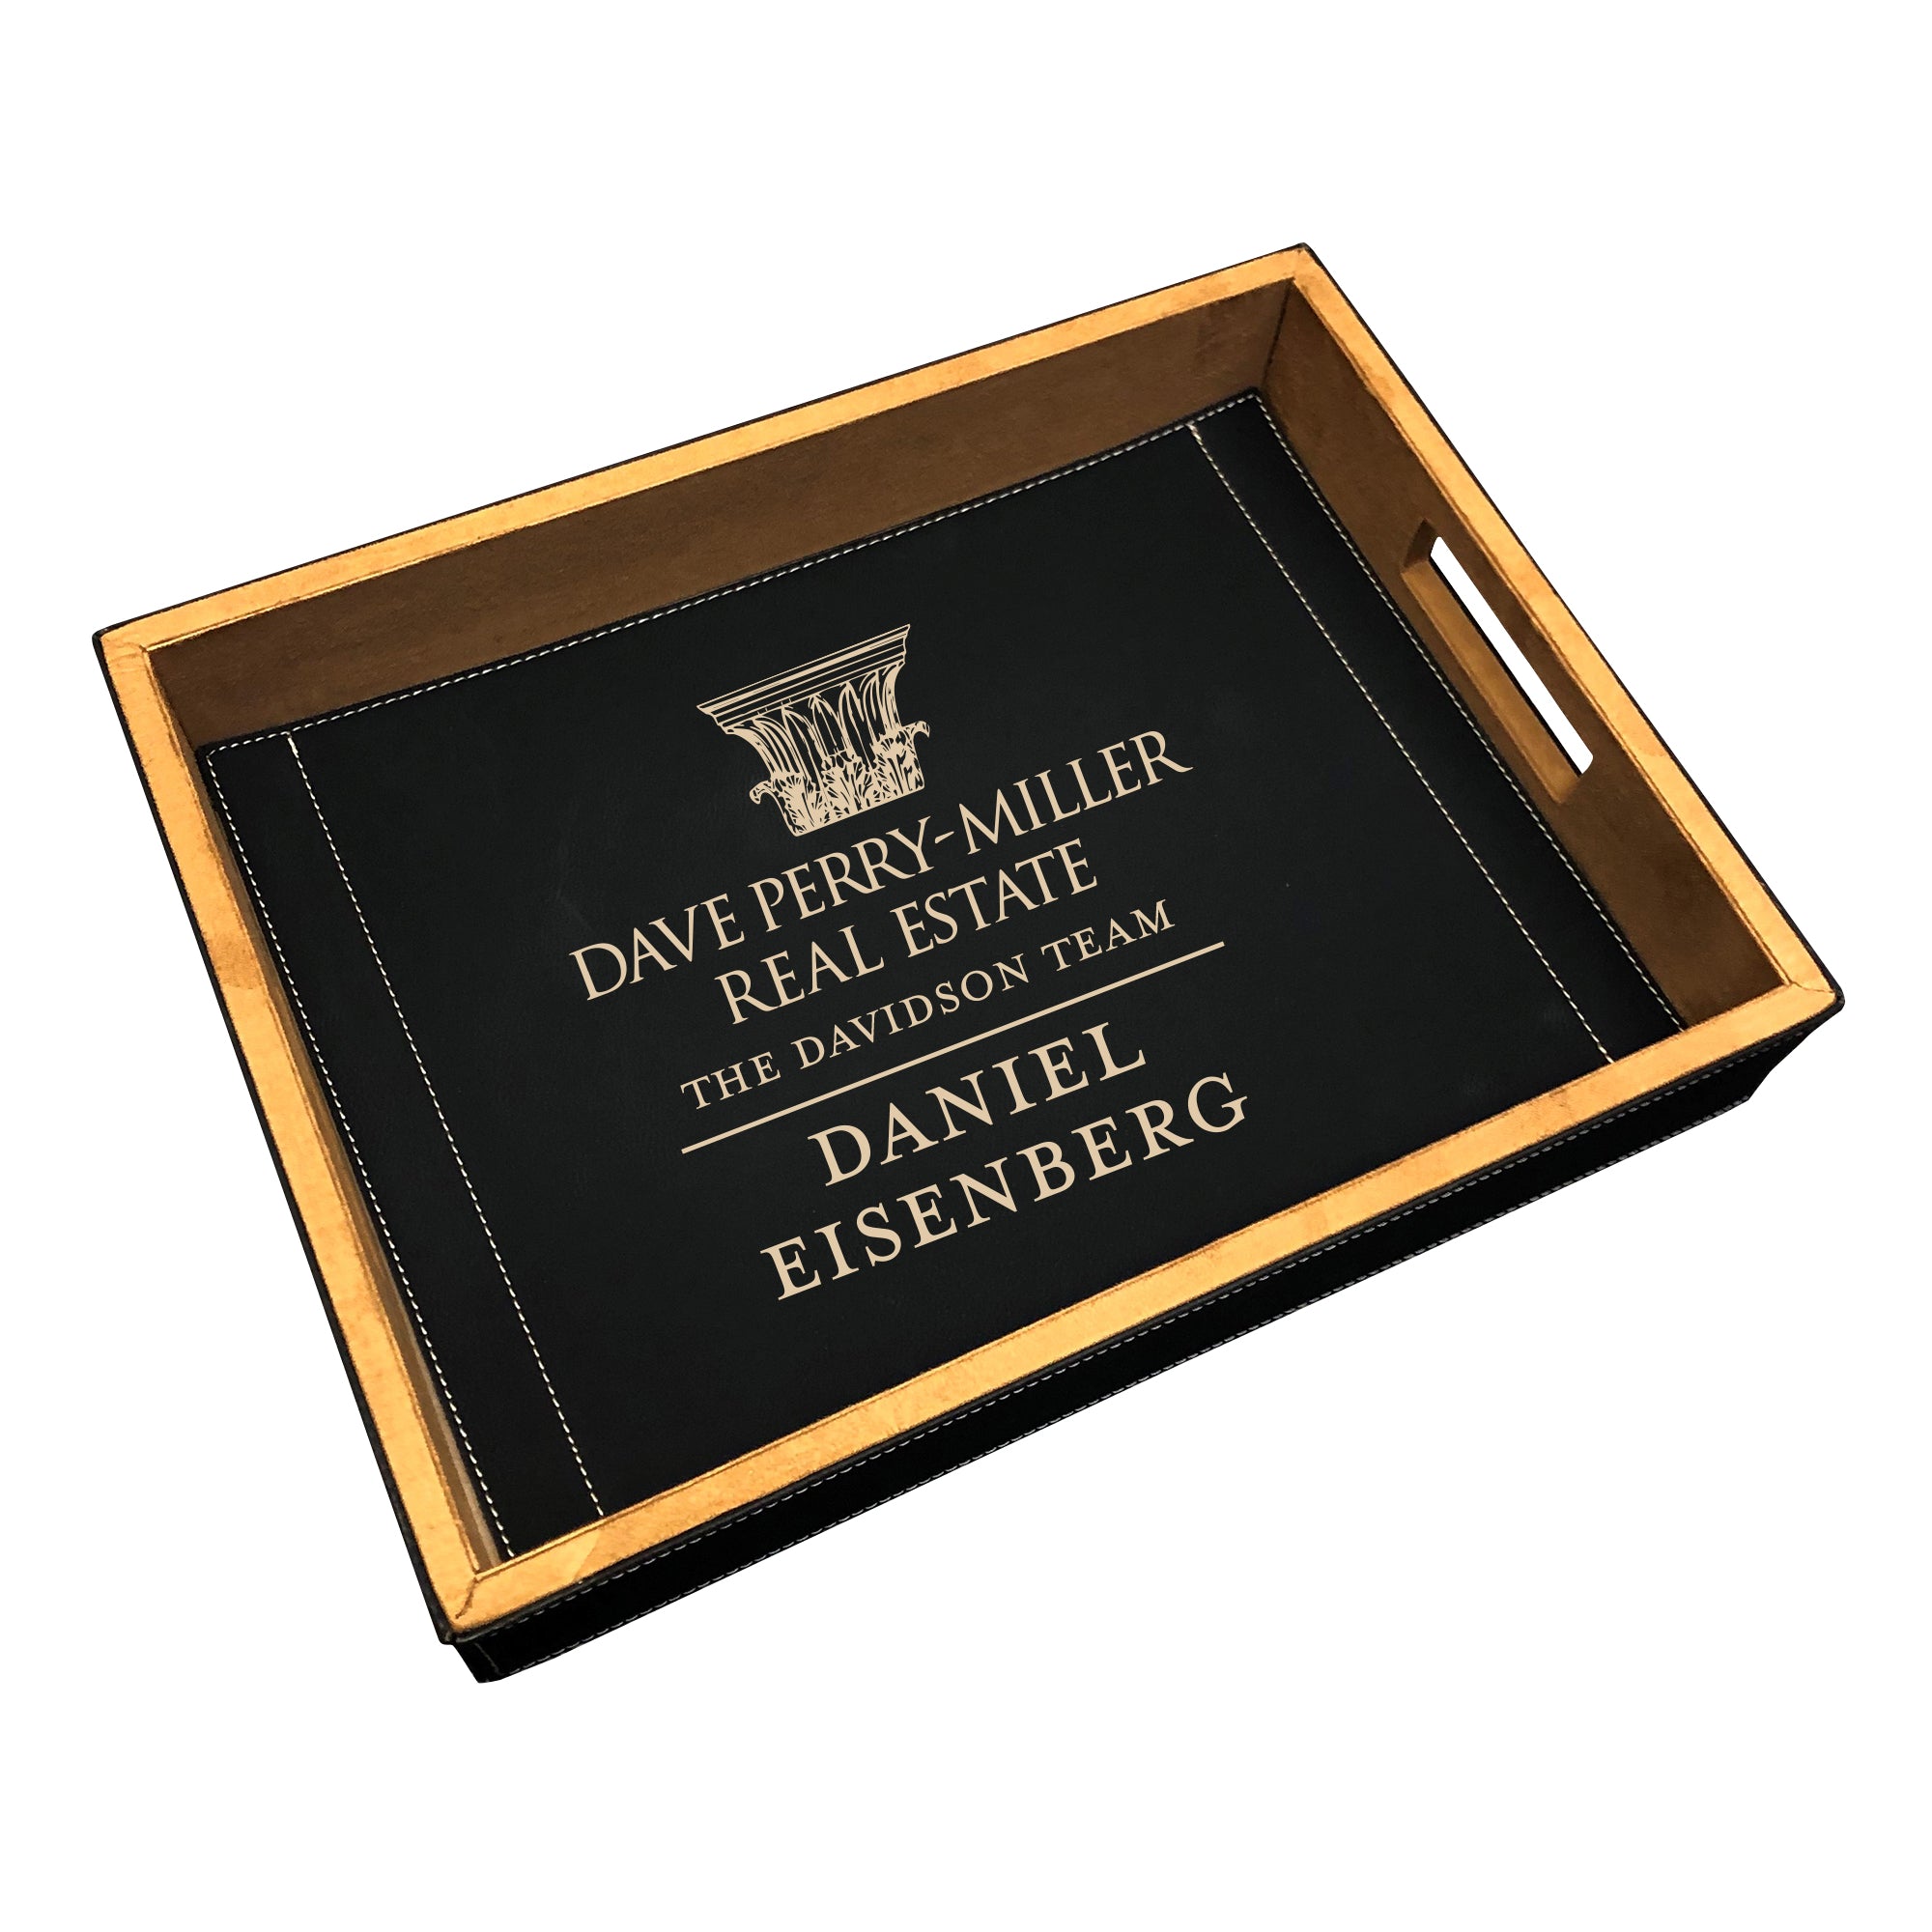 Dave Perry Miller Engraved Vegan Leather Serving Tray